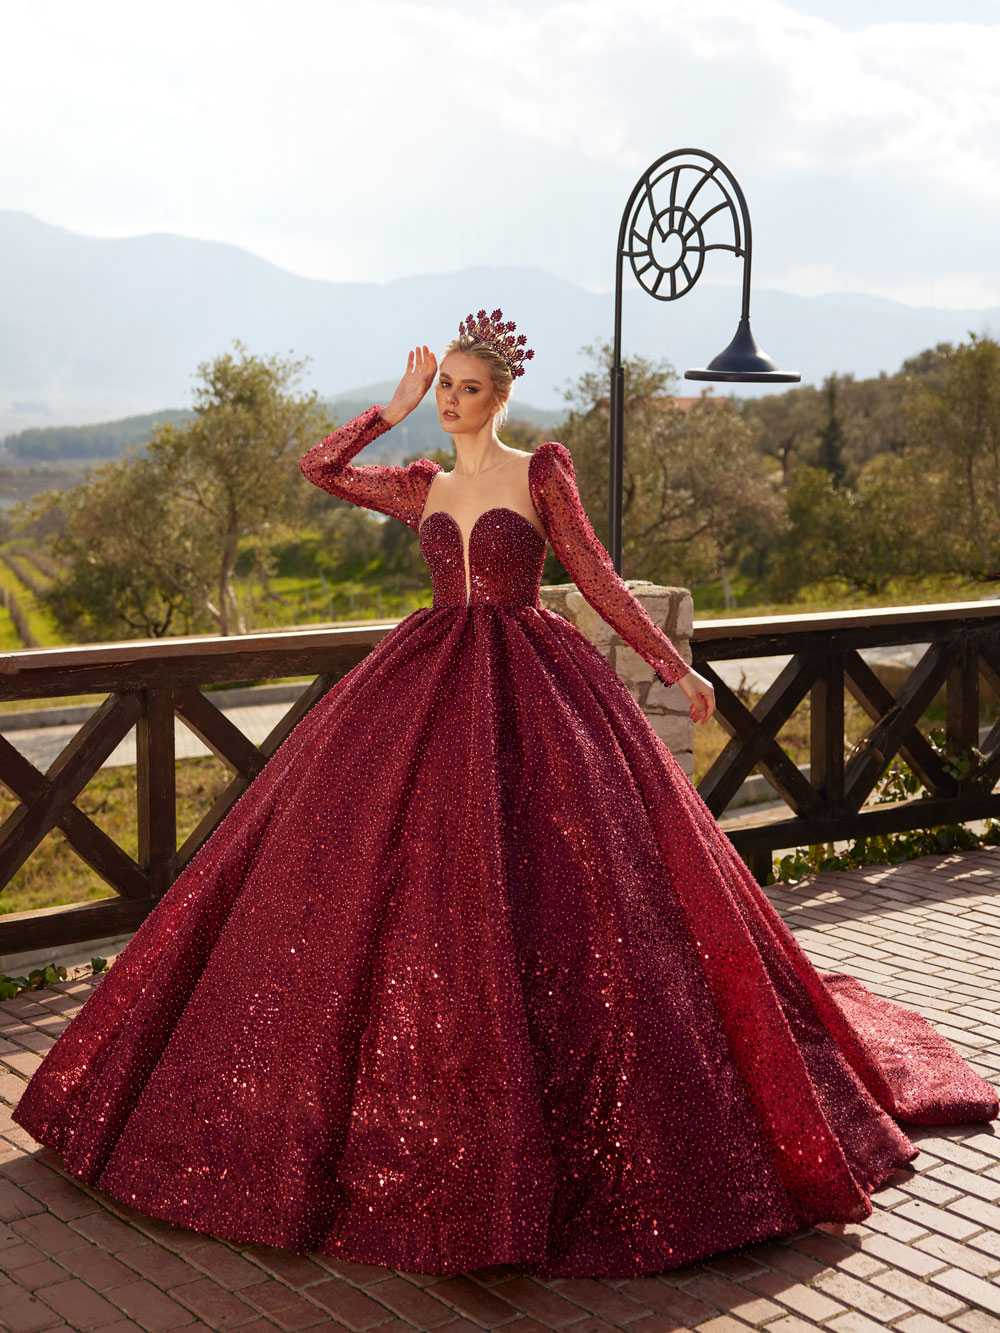 buy Burgundy Sweetheart Neck Long Sleeve Fully Sequined Long Tail Glitter Formal Wedding Bridal Ball Gown Prom Dress online ball gowns